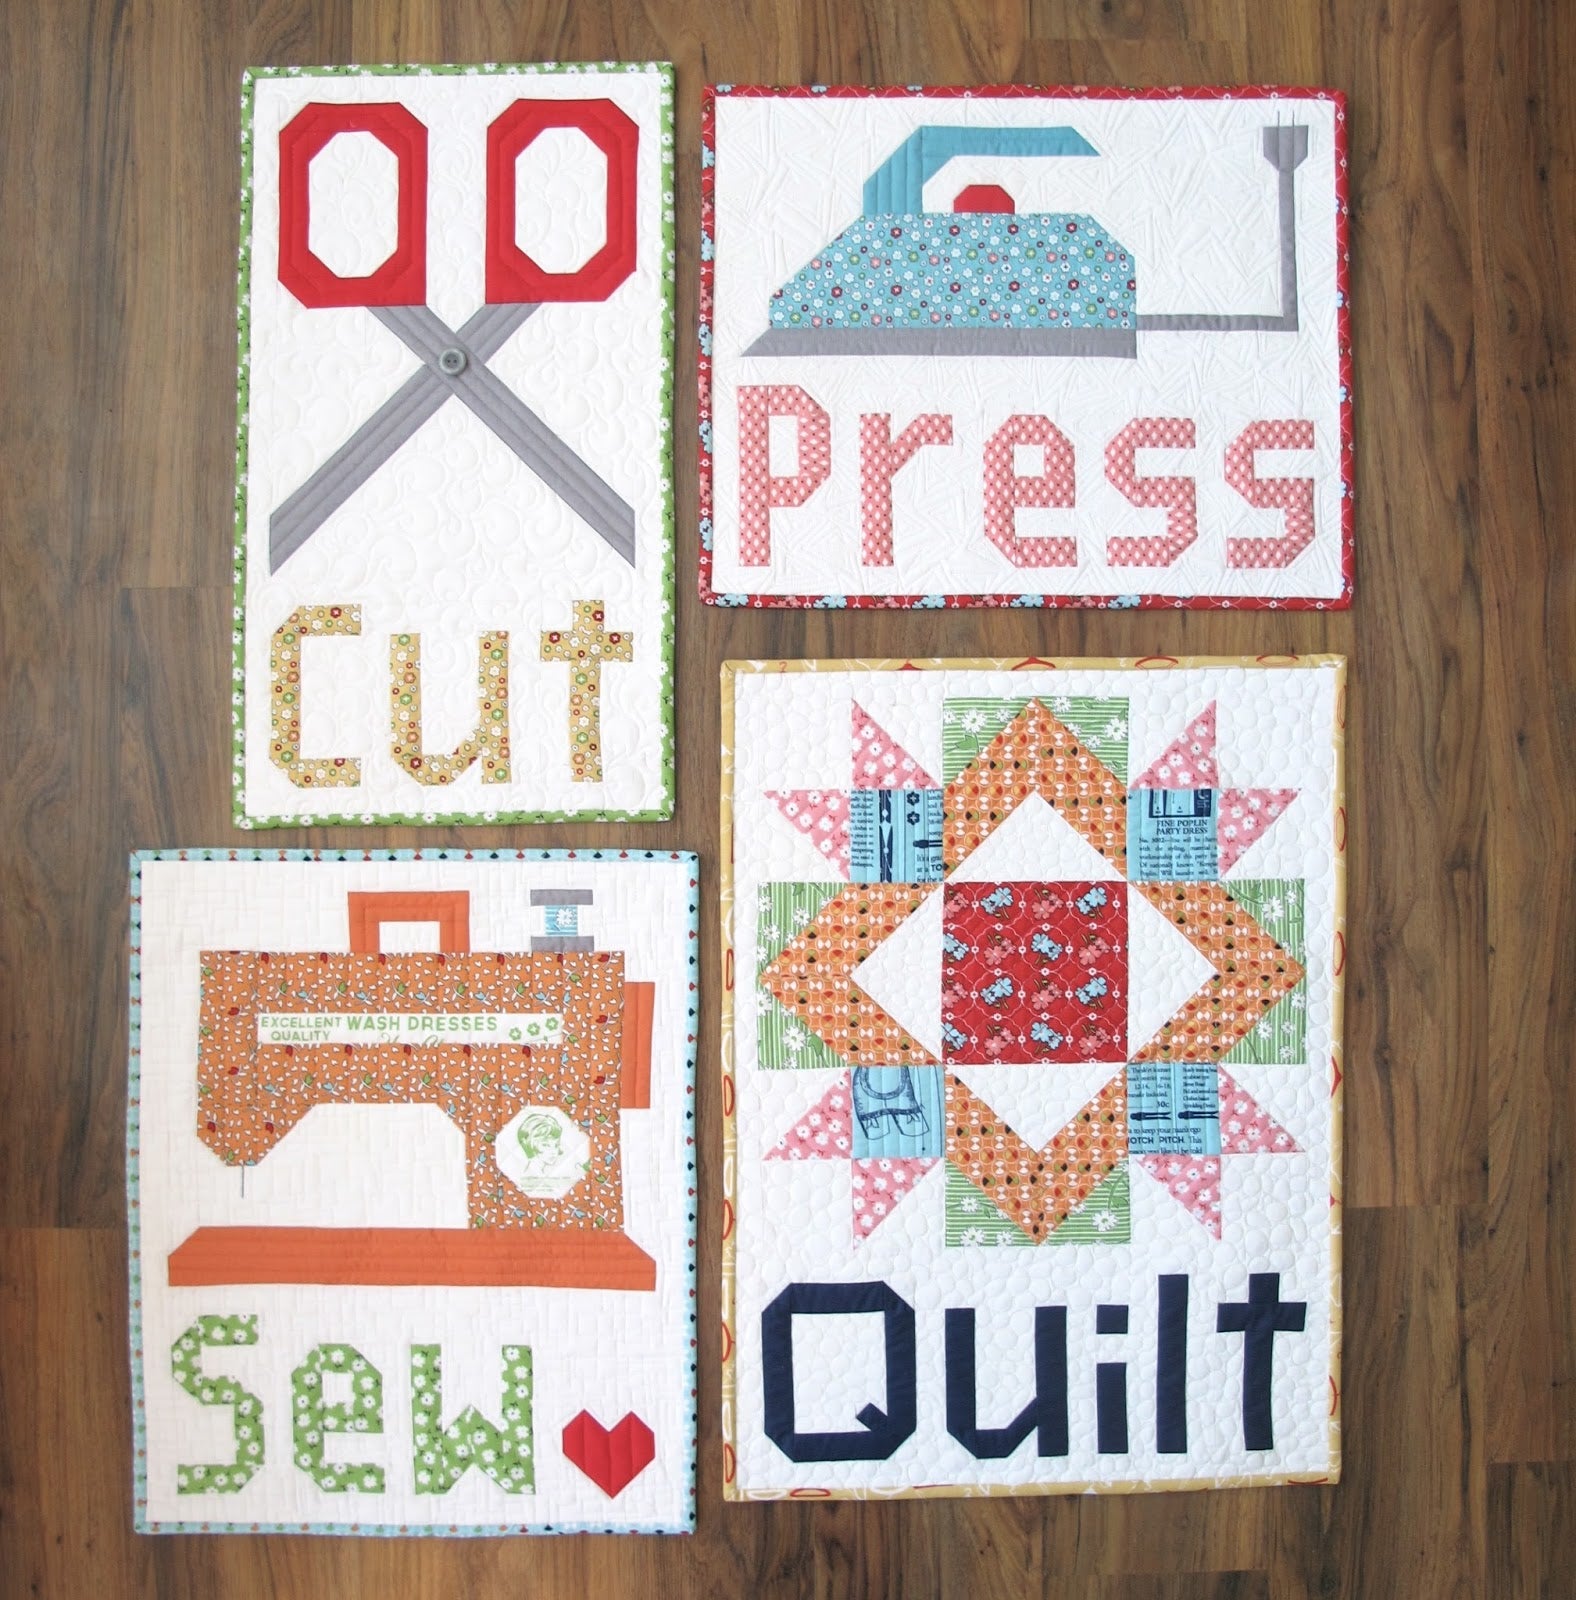 Vintage Sewing Machine & Notions Wall Hanging/Lap Quilt Kit - 42 x 42